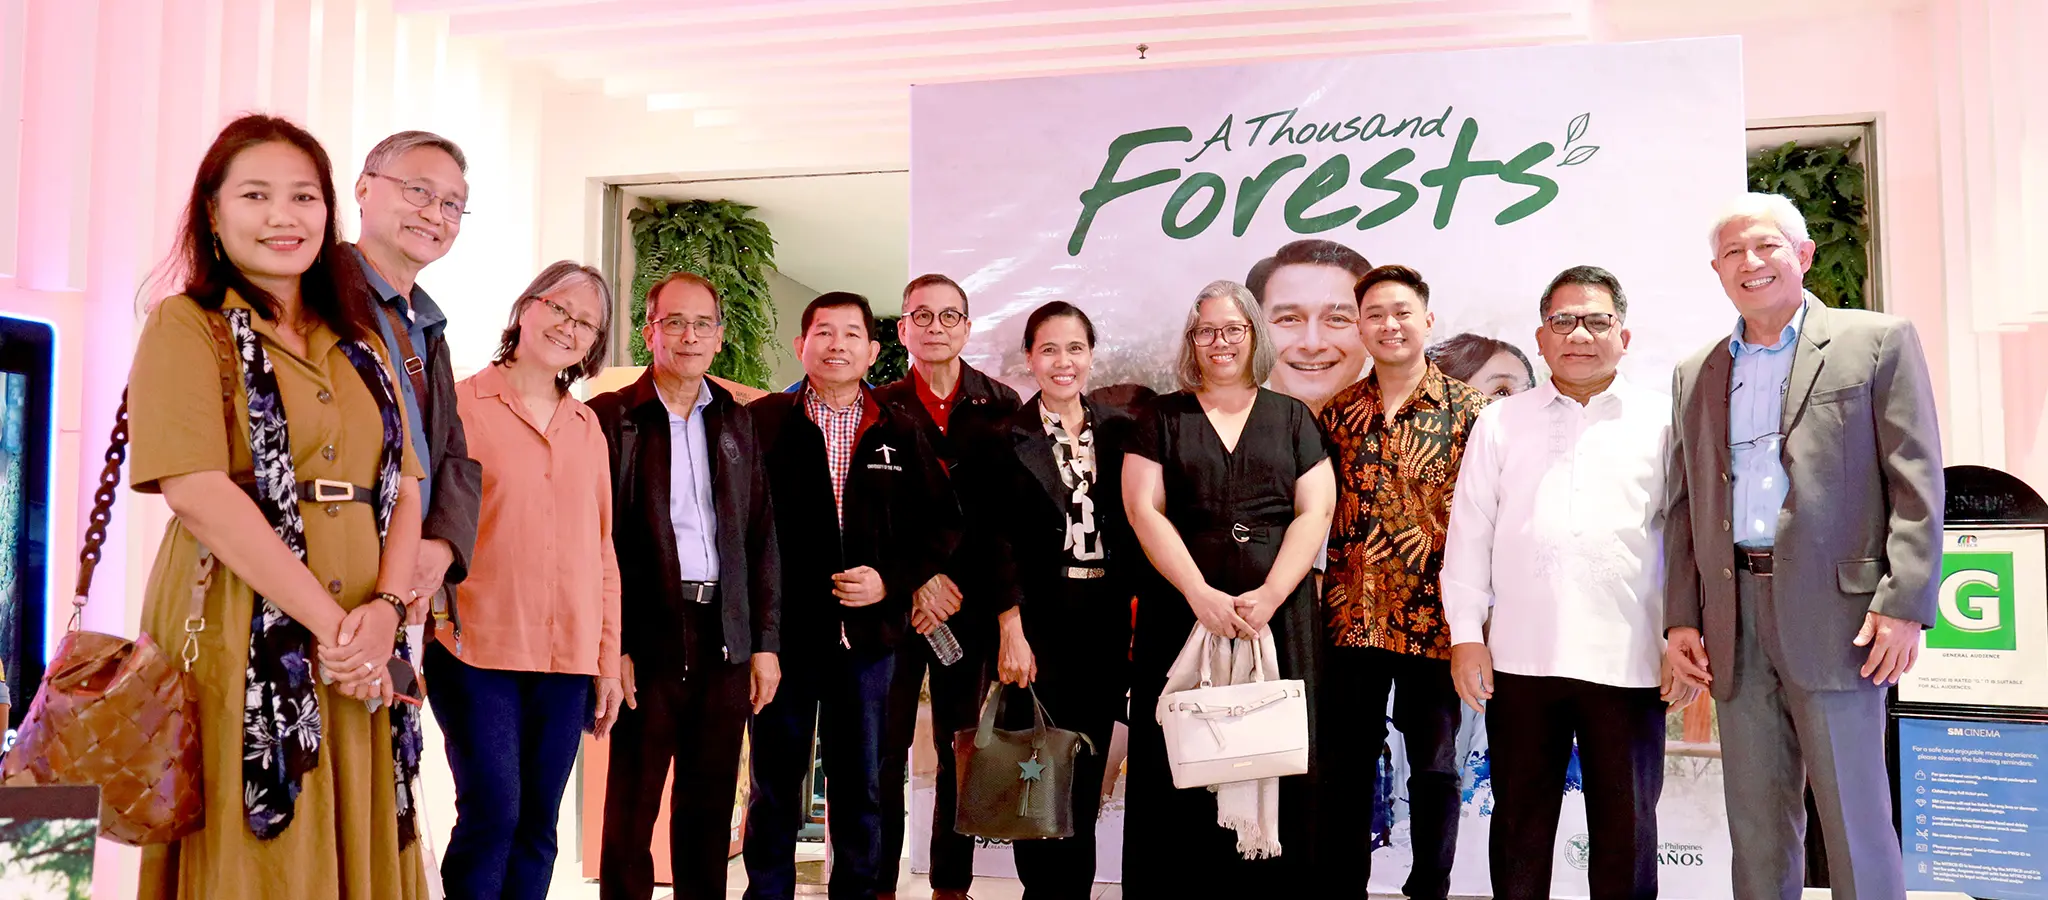 Environmental advocacy film, “A Thousand Forests” now showing in theaters nationwide_updated